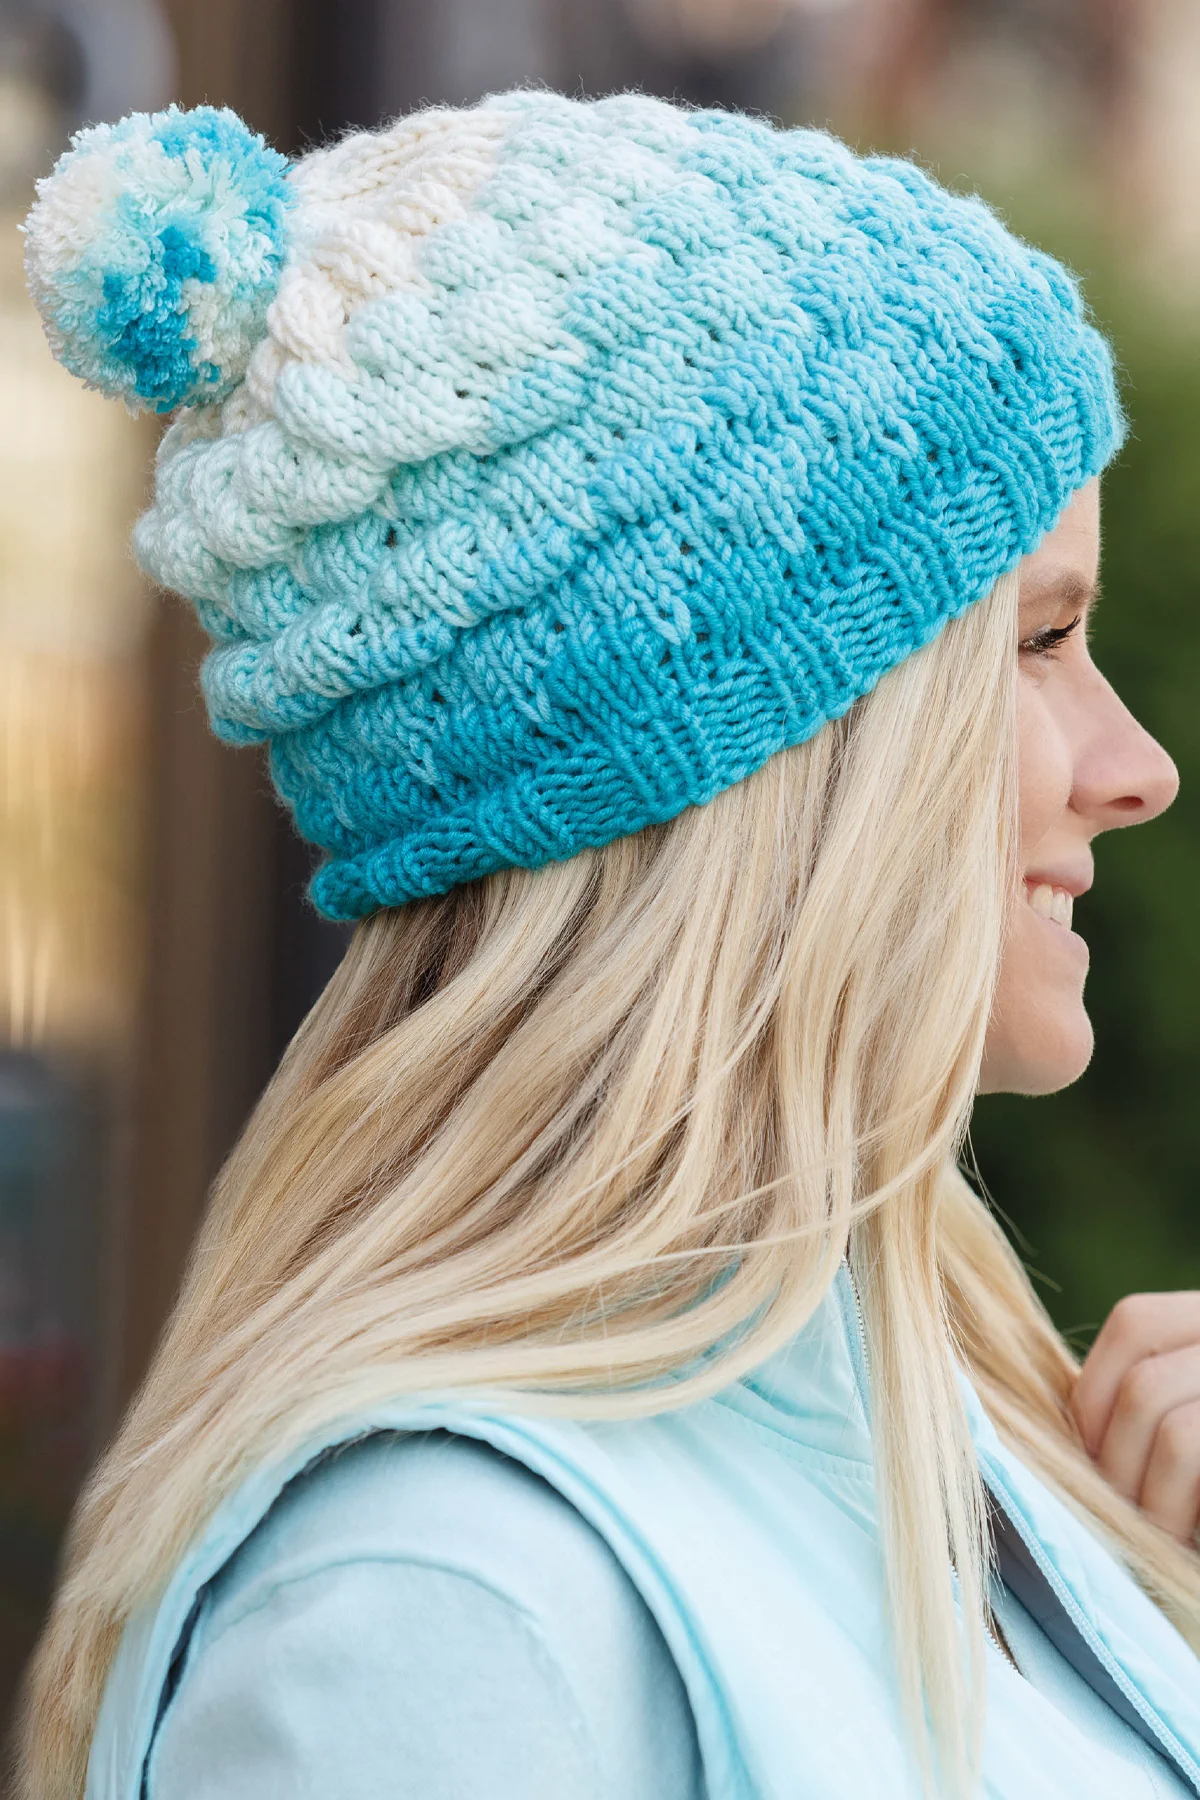 Bubble Beanie knitted hat in shades of blue and white yarn colors topped with a pompom worn by a woman with long blonde hair.